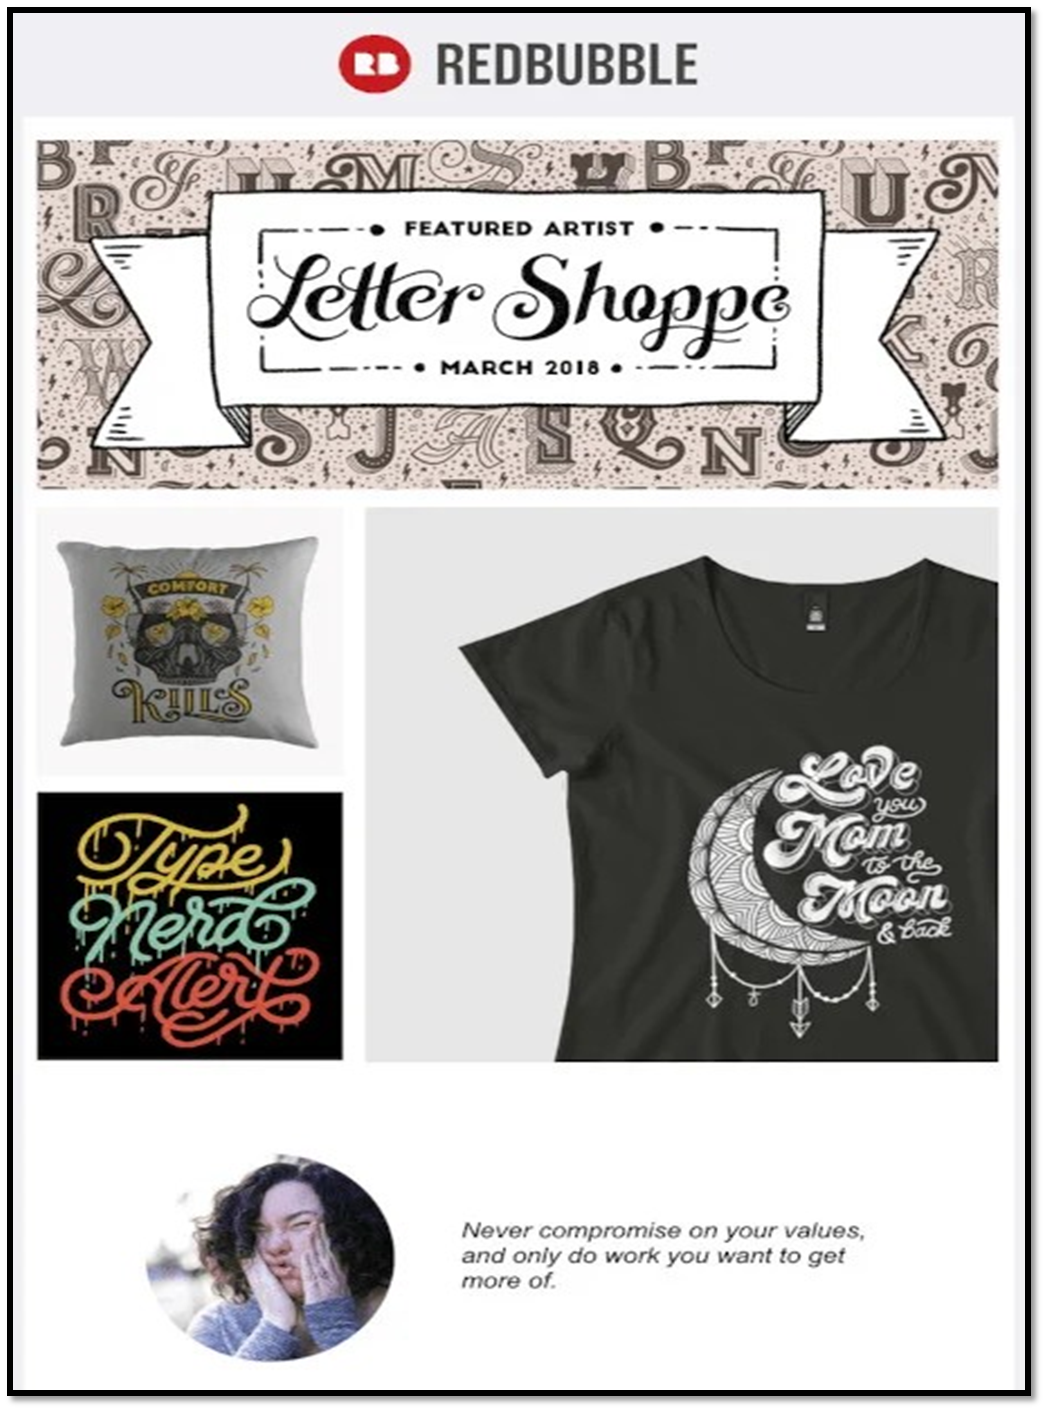 example of promotion email by redbubble RedBubble sells merchandise designed by artists. They send emails to promote the merchandise to the customers.